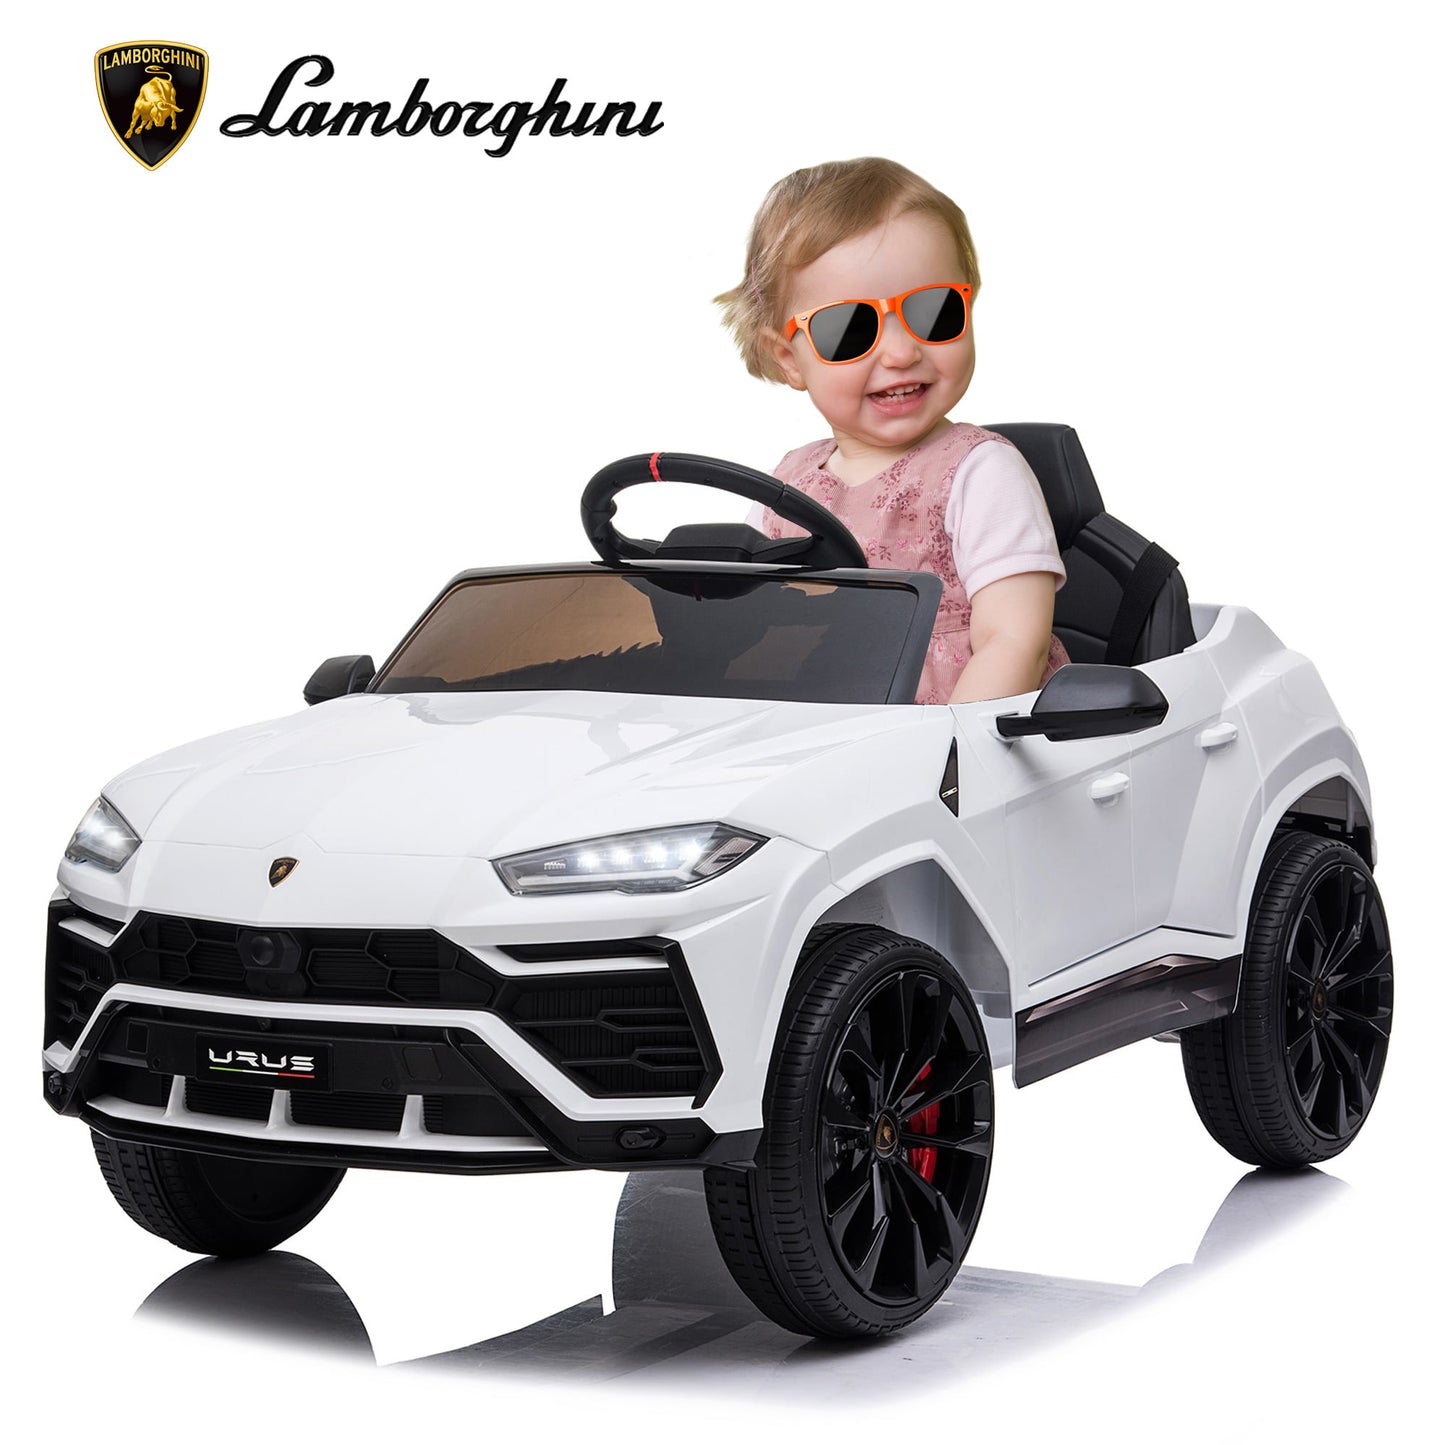 SYNGAR Battery Operated Car Toy for Kids, Licensed Lamborghini Ride on Cars with Remote Control, 3 Speeds, LED Lights, Player, Horn, Electric Vehicle Kids Party Gift, White